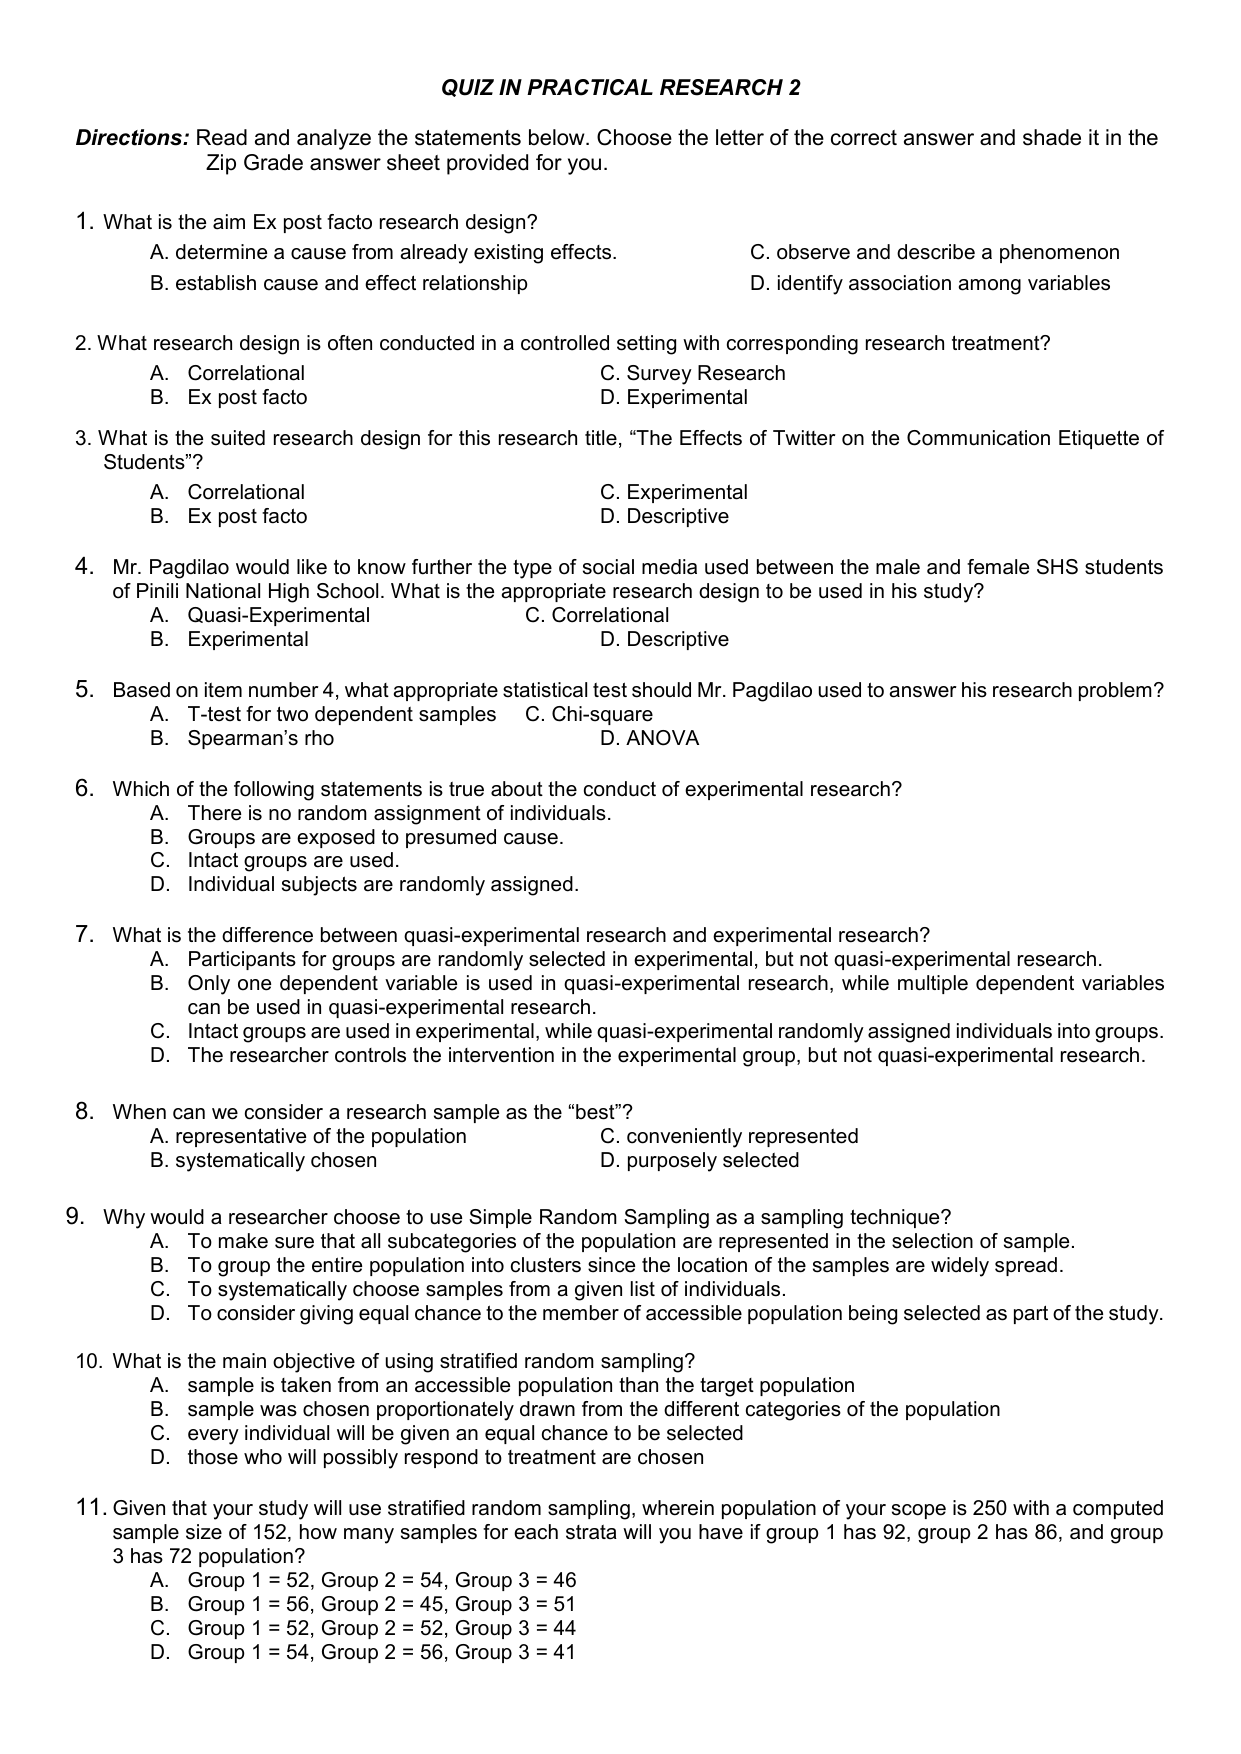 clinical research test questions